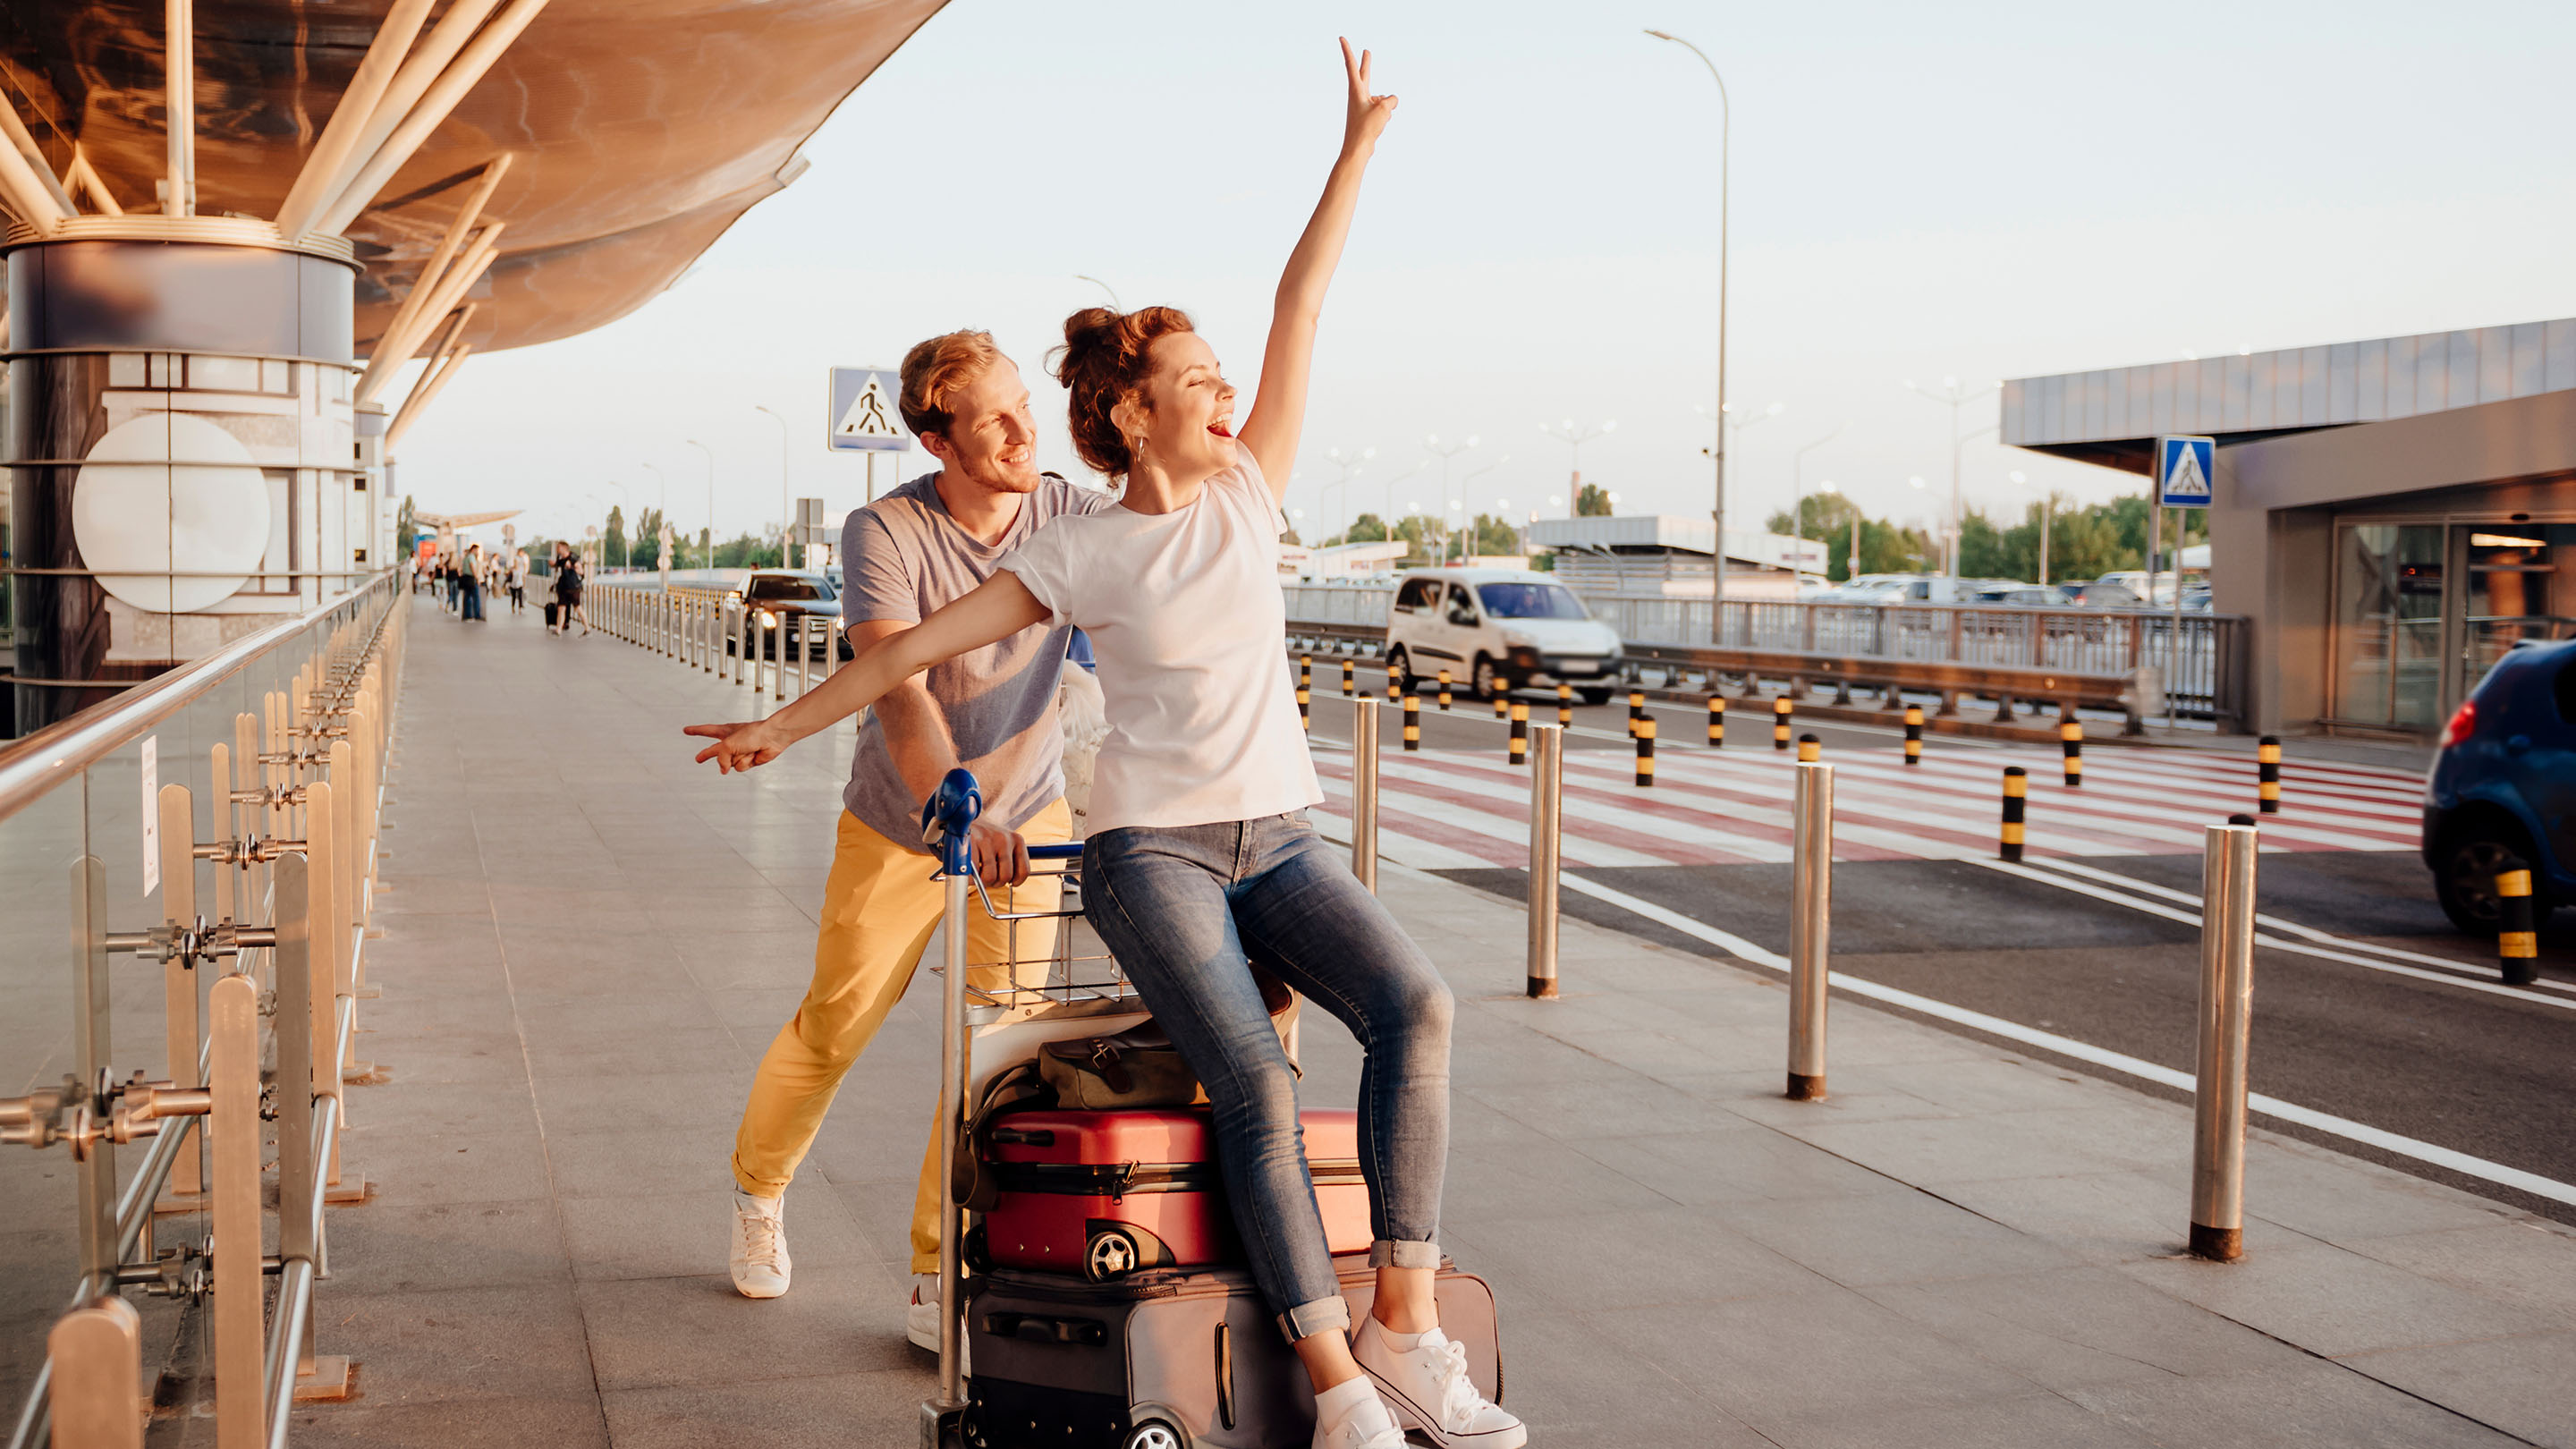 Man and woman outside an airport. The woman is riding on top of a luggage cart while the man pushes it.